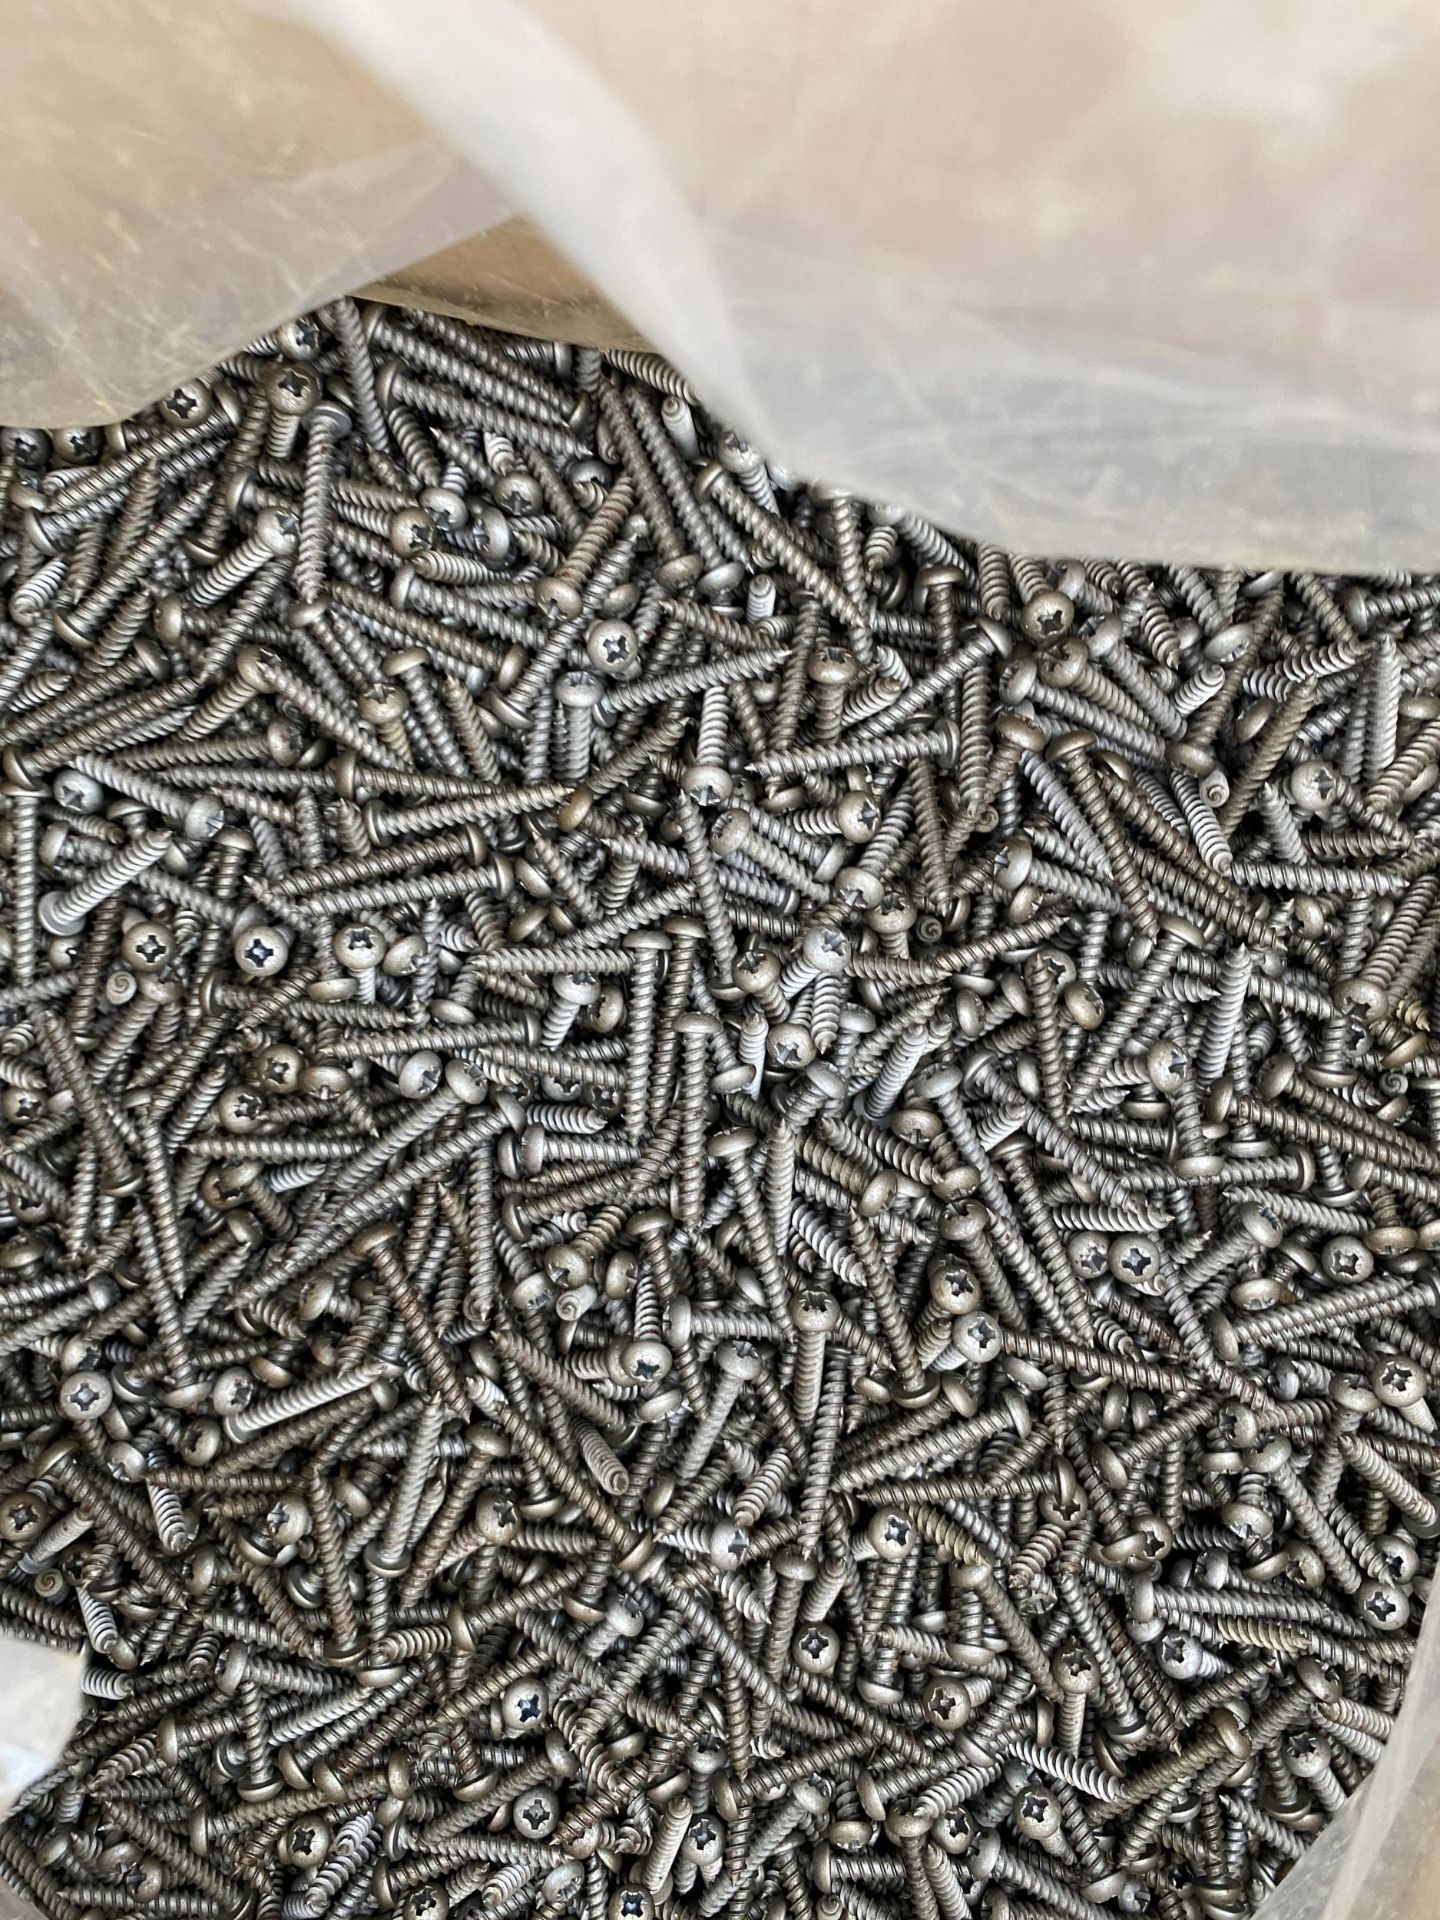 A LARGE QUANTITY OF SELF TAPPING SCREWS - Image 2 of 3